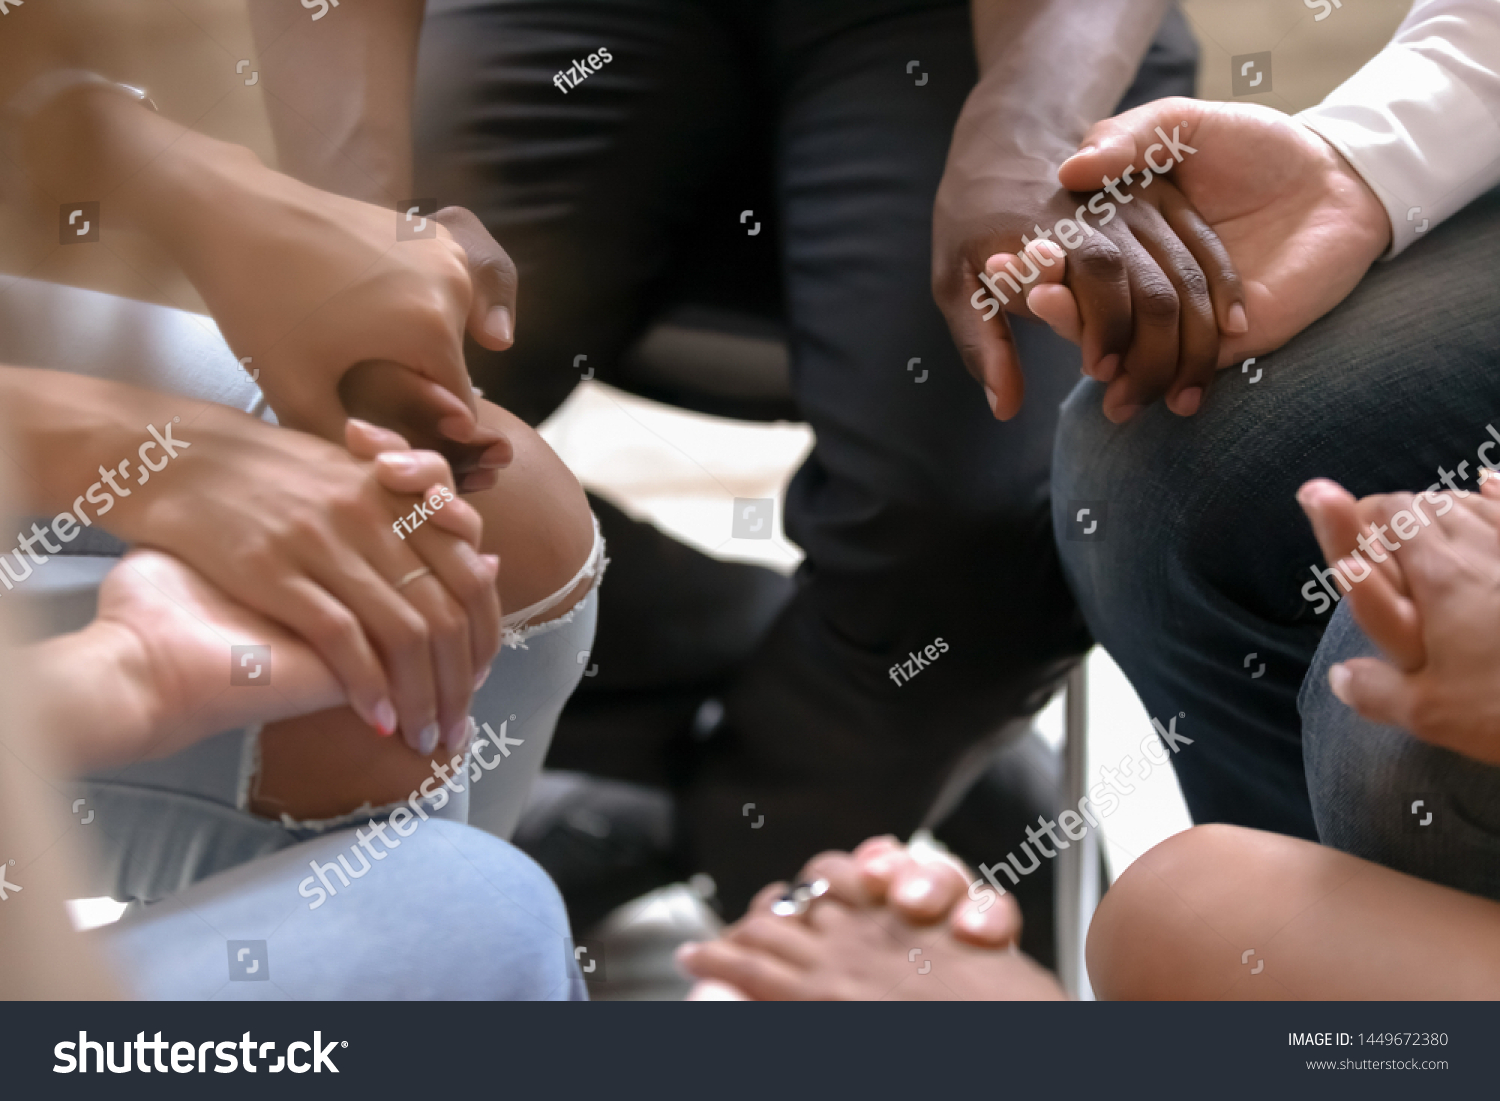 Close up diverse people sitting on chairs in circle, holding hands at group therapy counselling session, psychological help, trust and support, drug alcohol addiction treatment rehab concept #1449672380